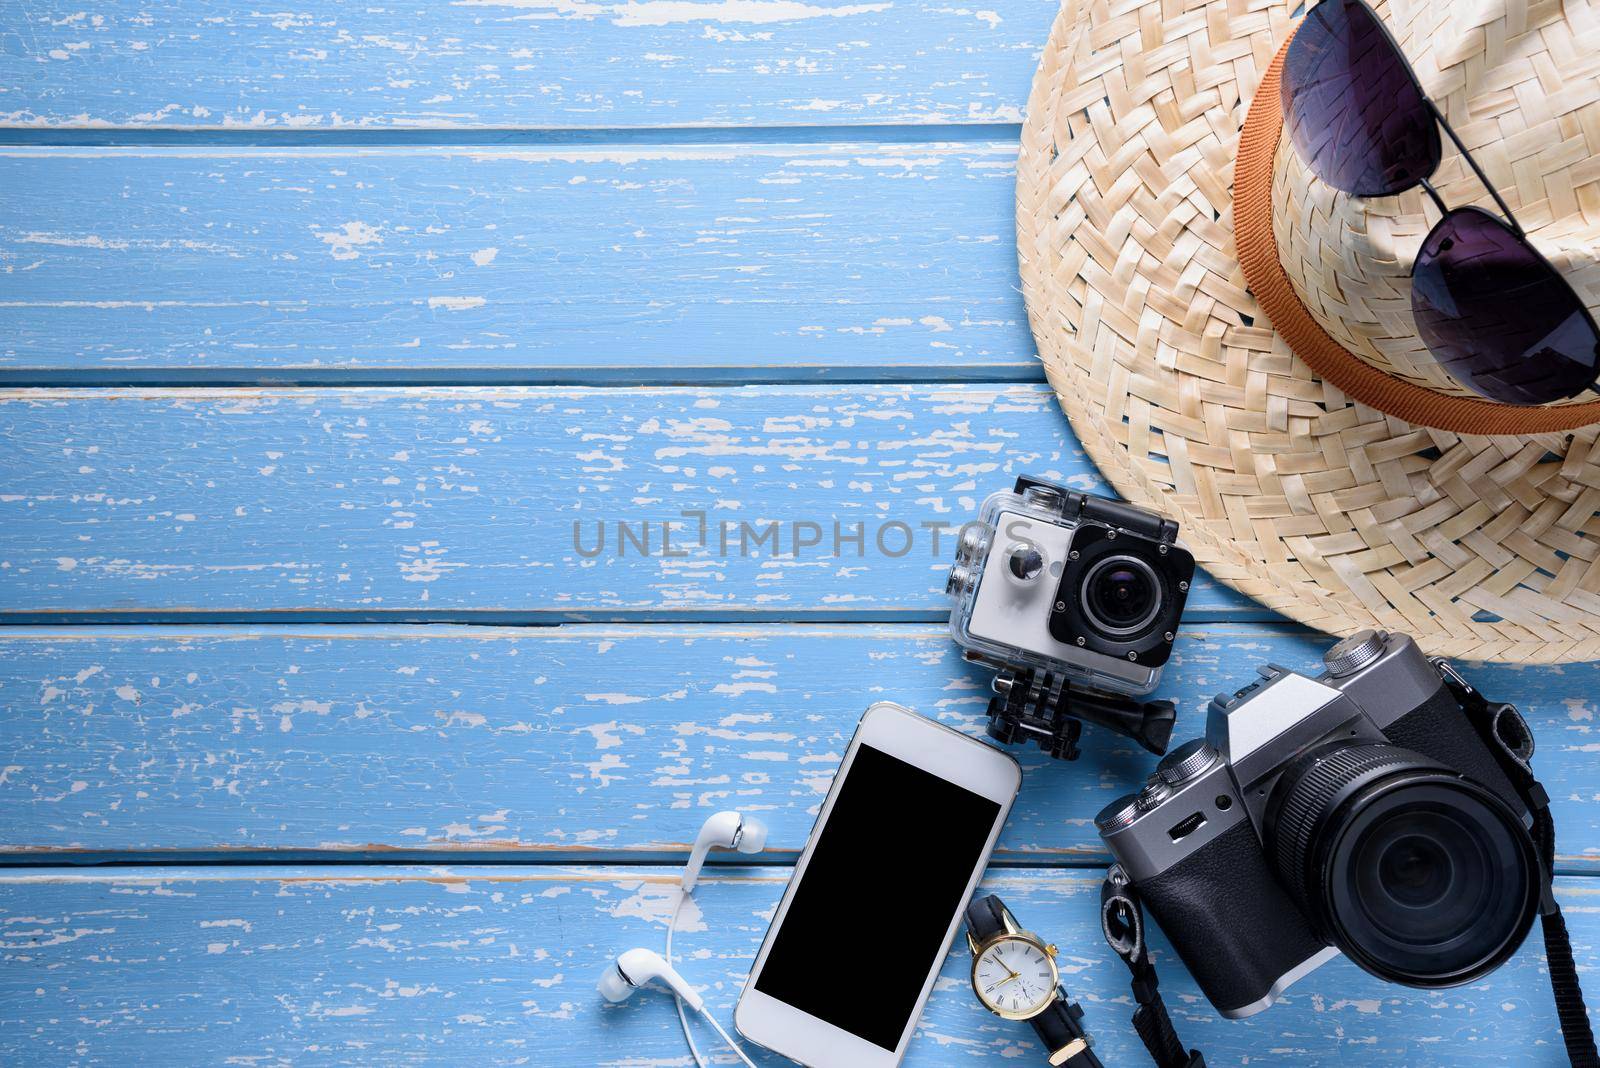 Top view of Traveler's accessories, Flat lay photography of Travel concept on blue background